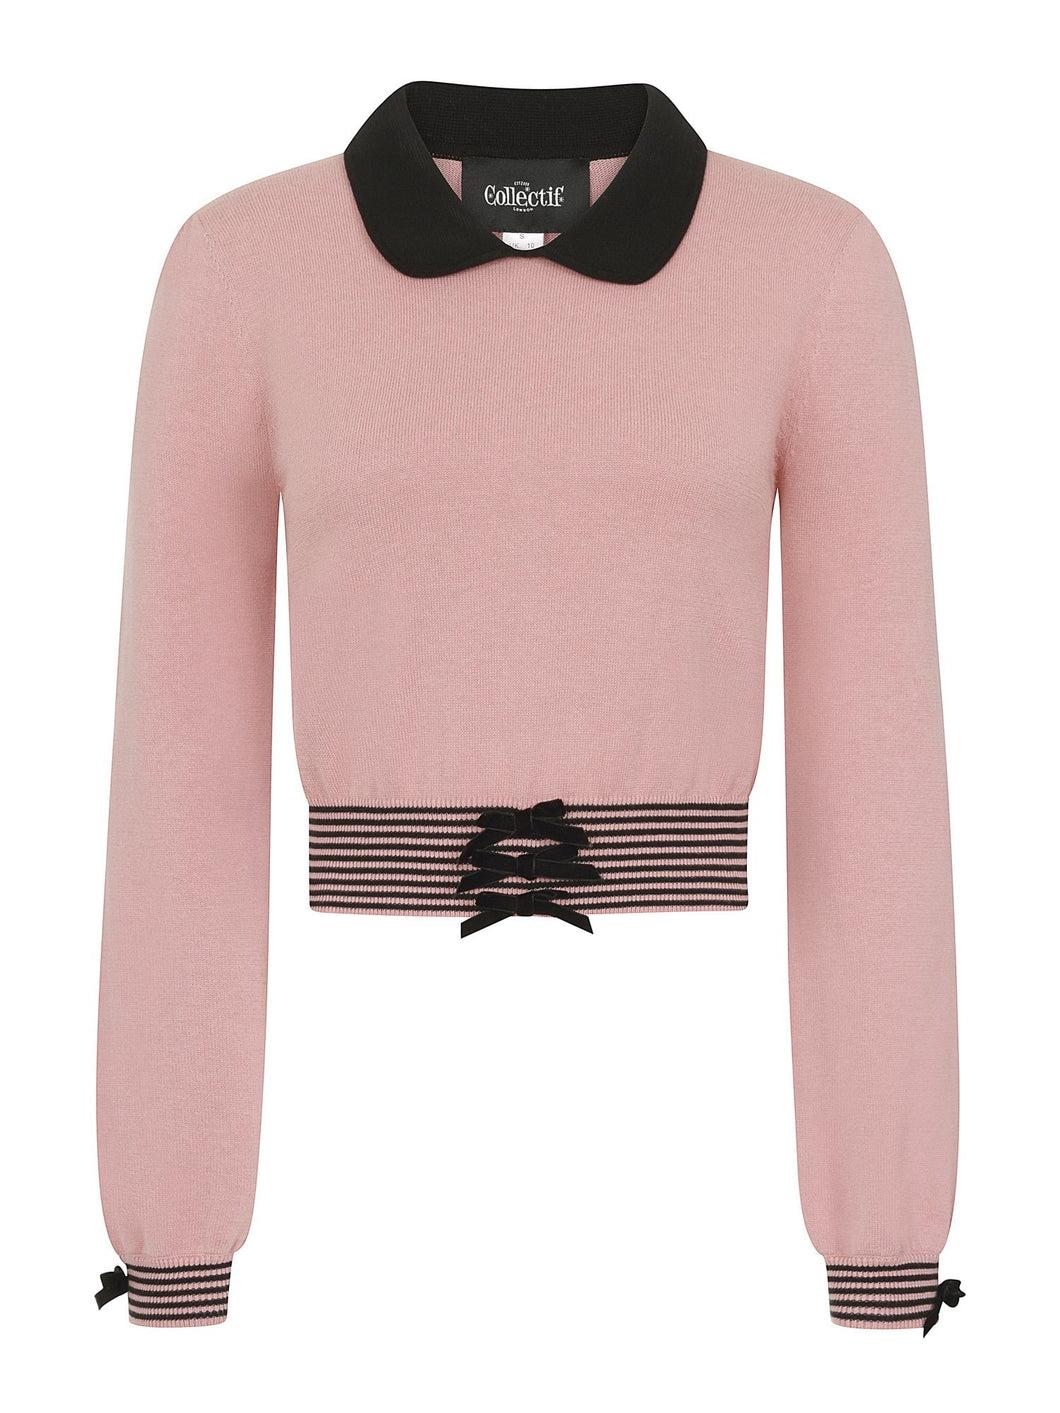 Maeve Pink and Black Bow Jumper Top